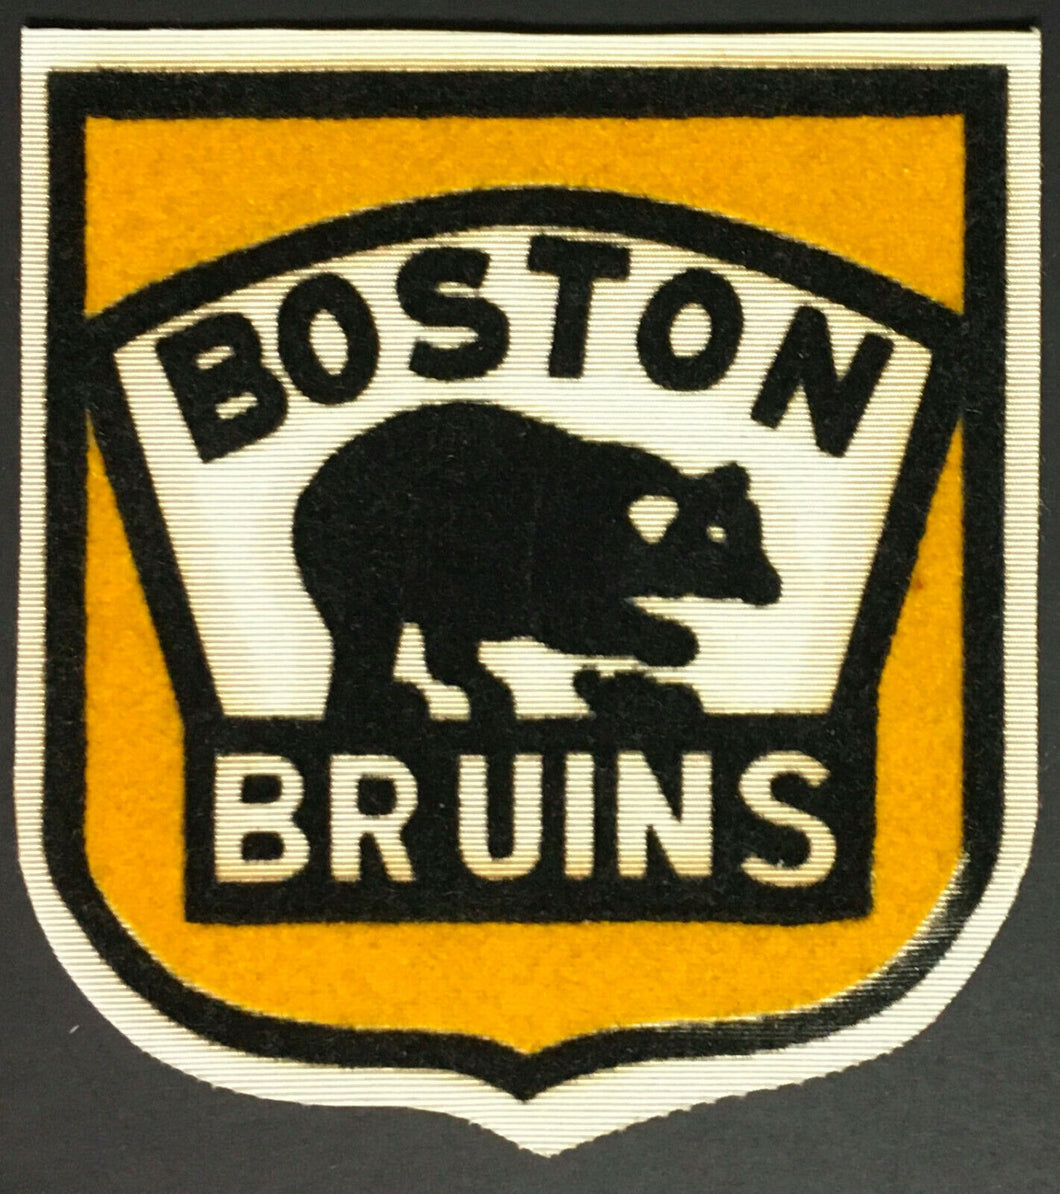 1940's Boston Bruins NHL Hockey Jersey Crest Vintage Old Unused Patch Eaton's